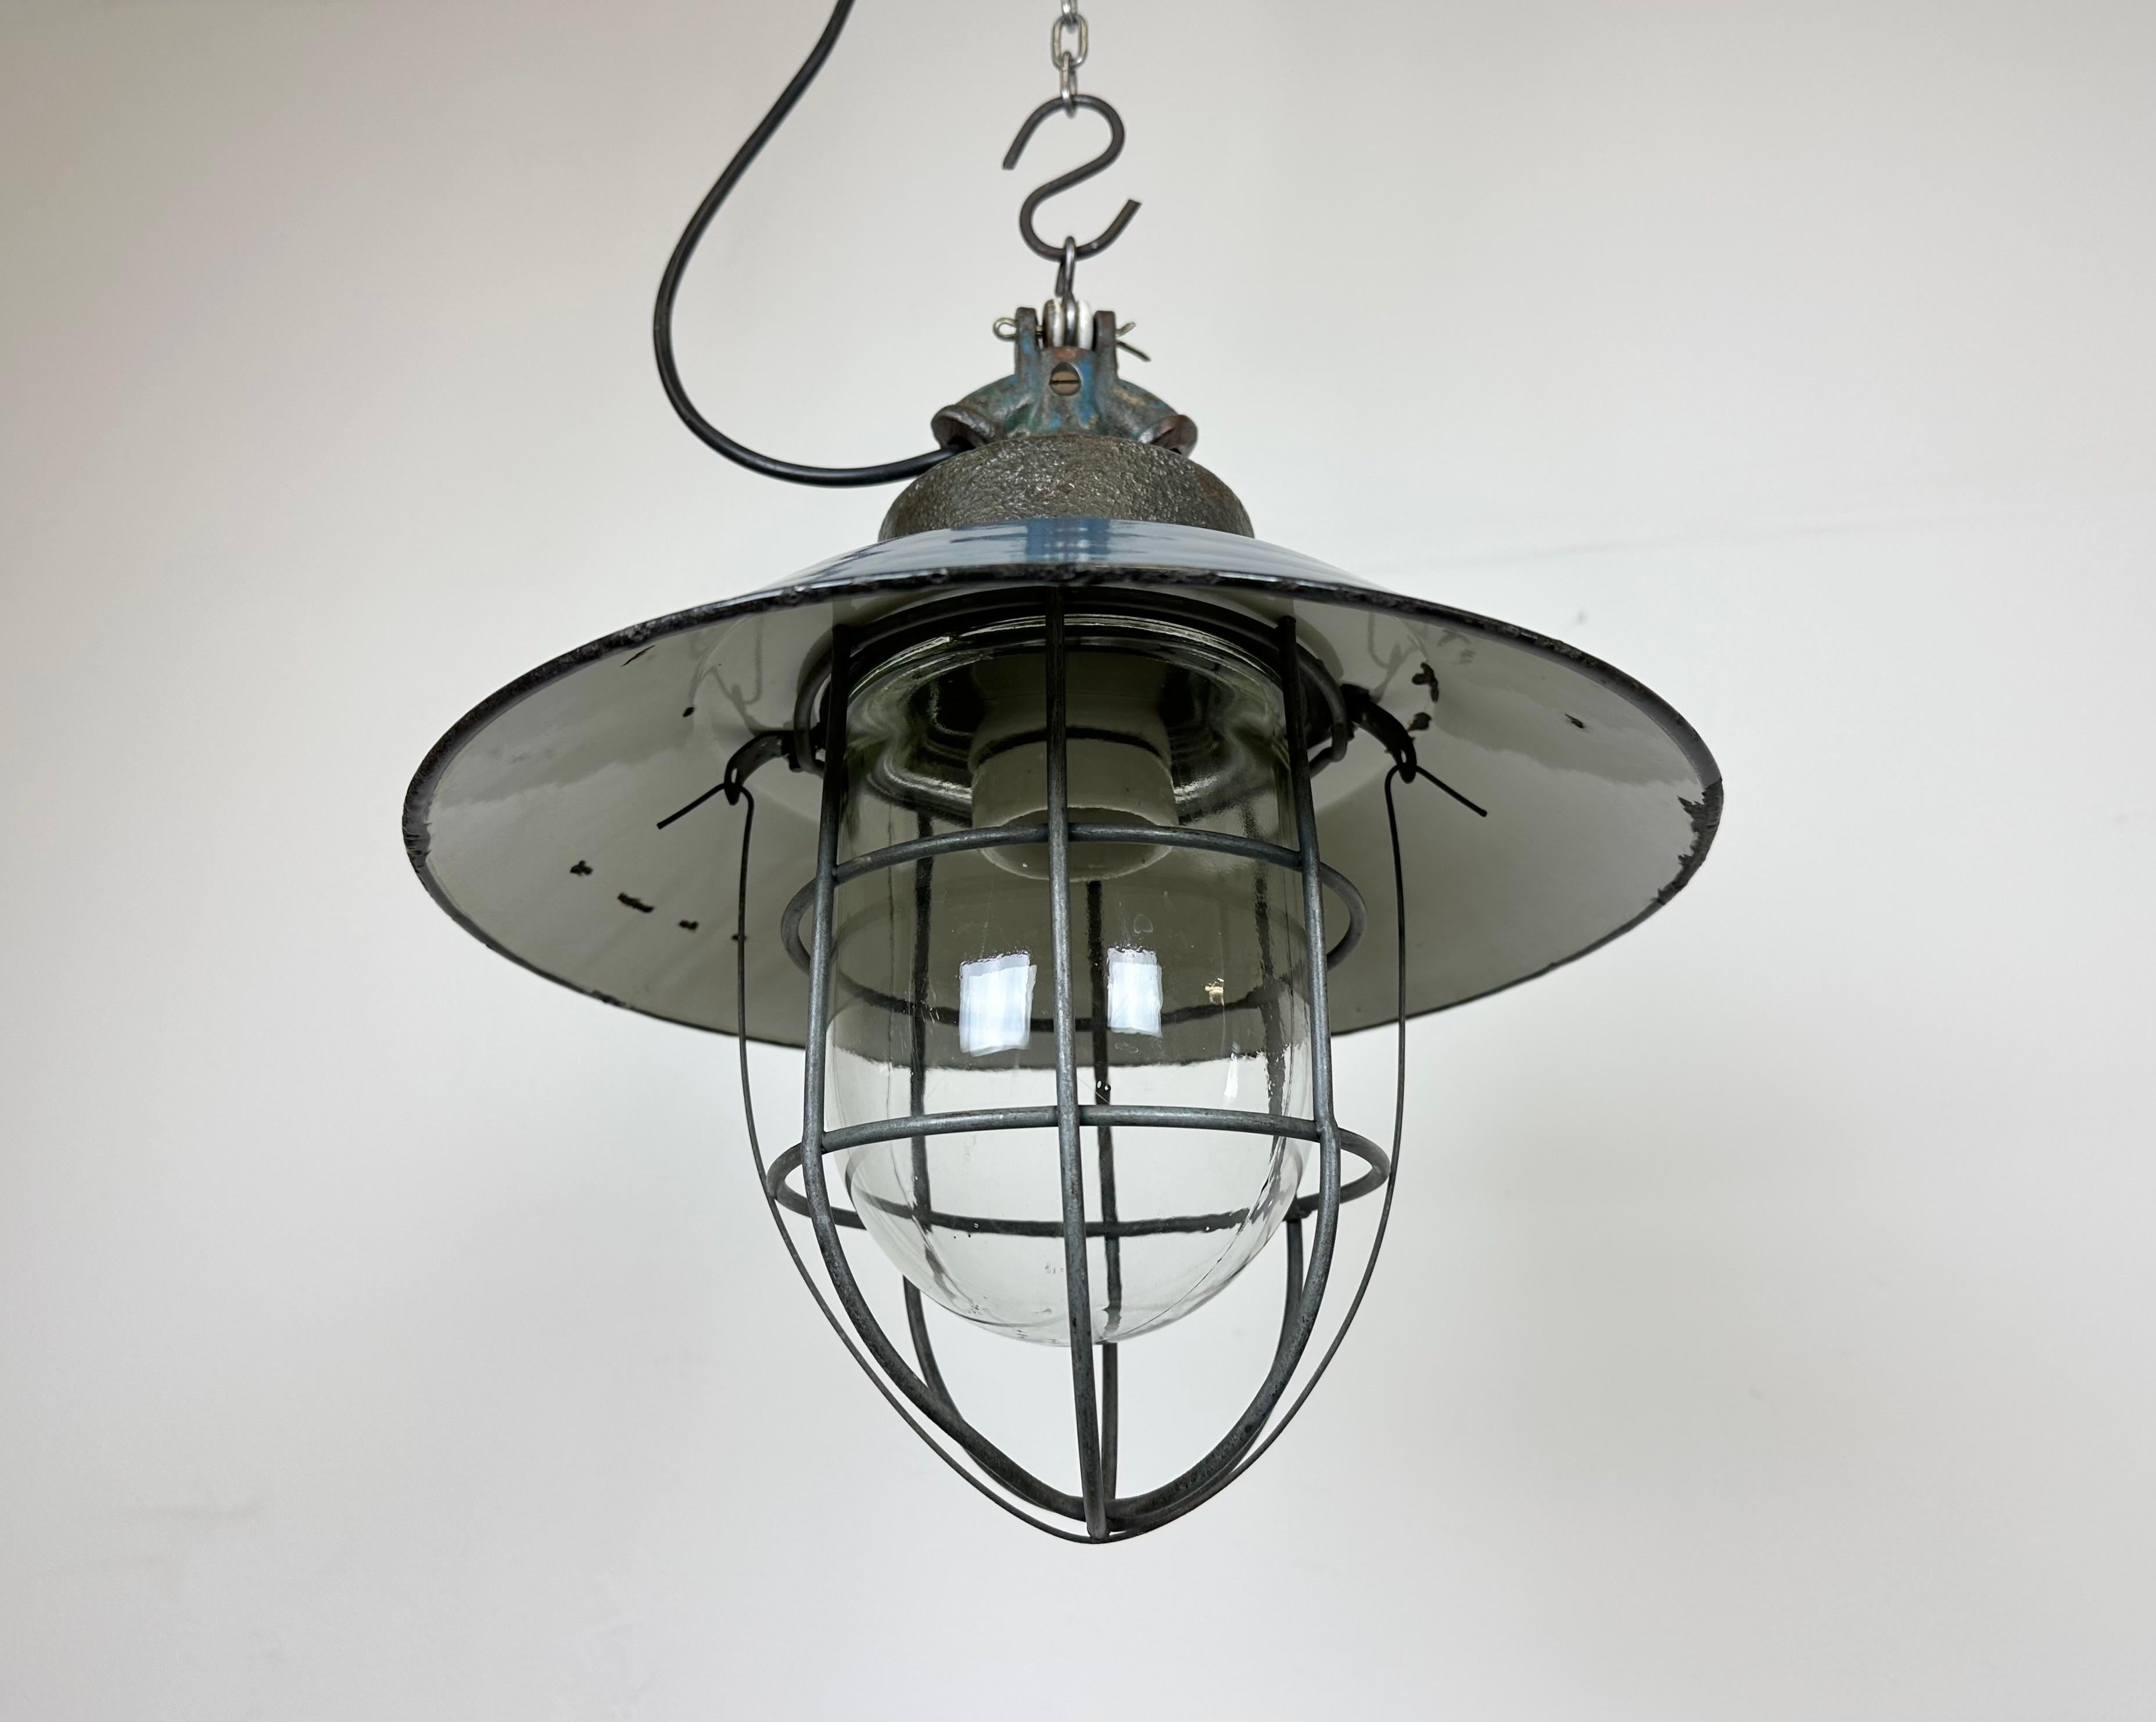 Blue Enamel and Cast Iron Industrial Cage Pendant Light, 1960s For Sale 5